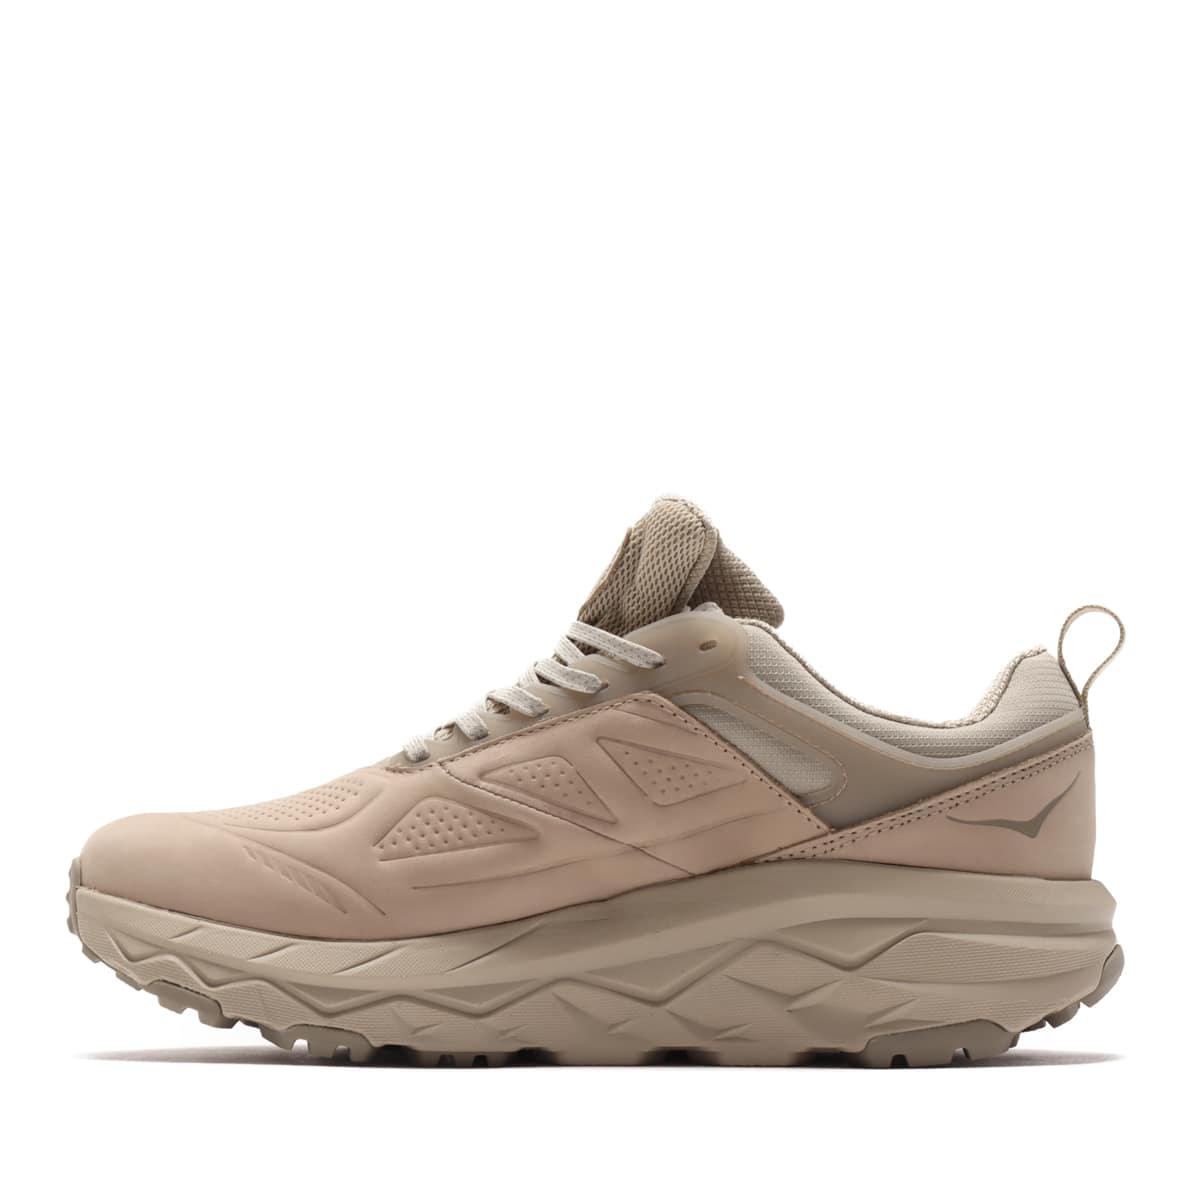 HOKA ONEONE CHALLENGER LOW GORE-TEX WIDE OXFORD TAN/DUNE 20FW-I